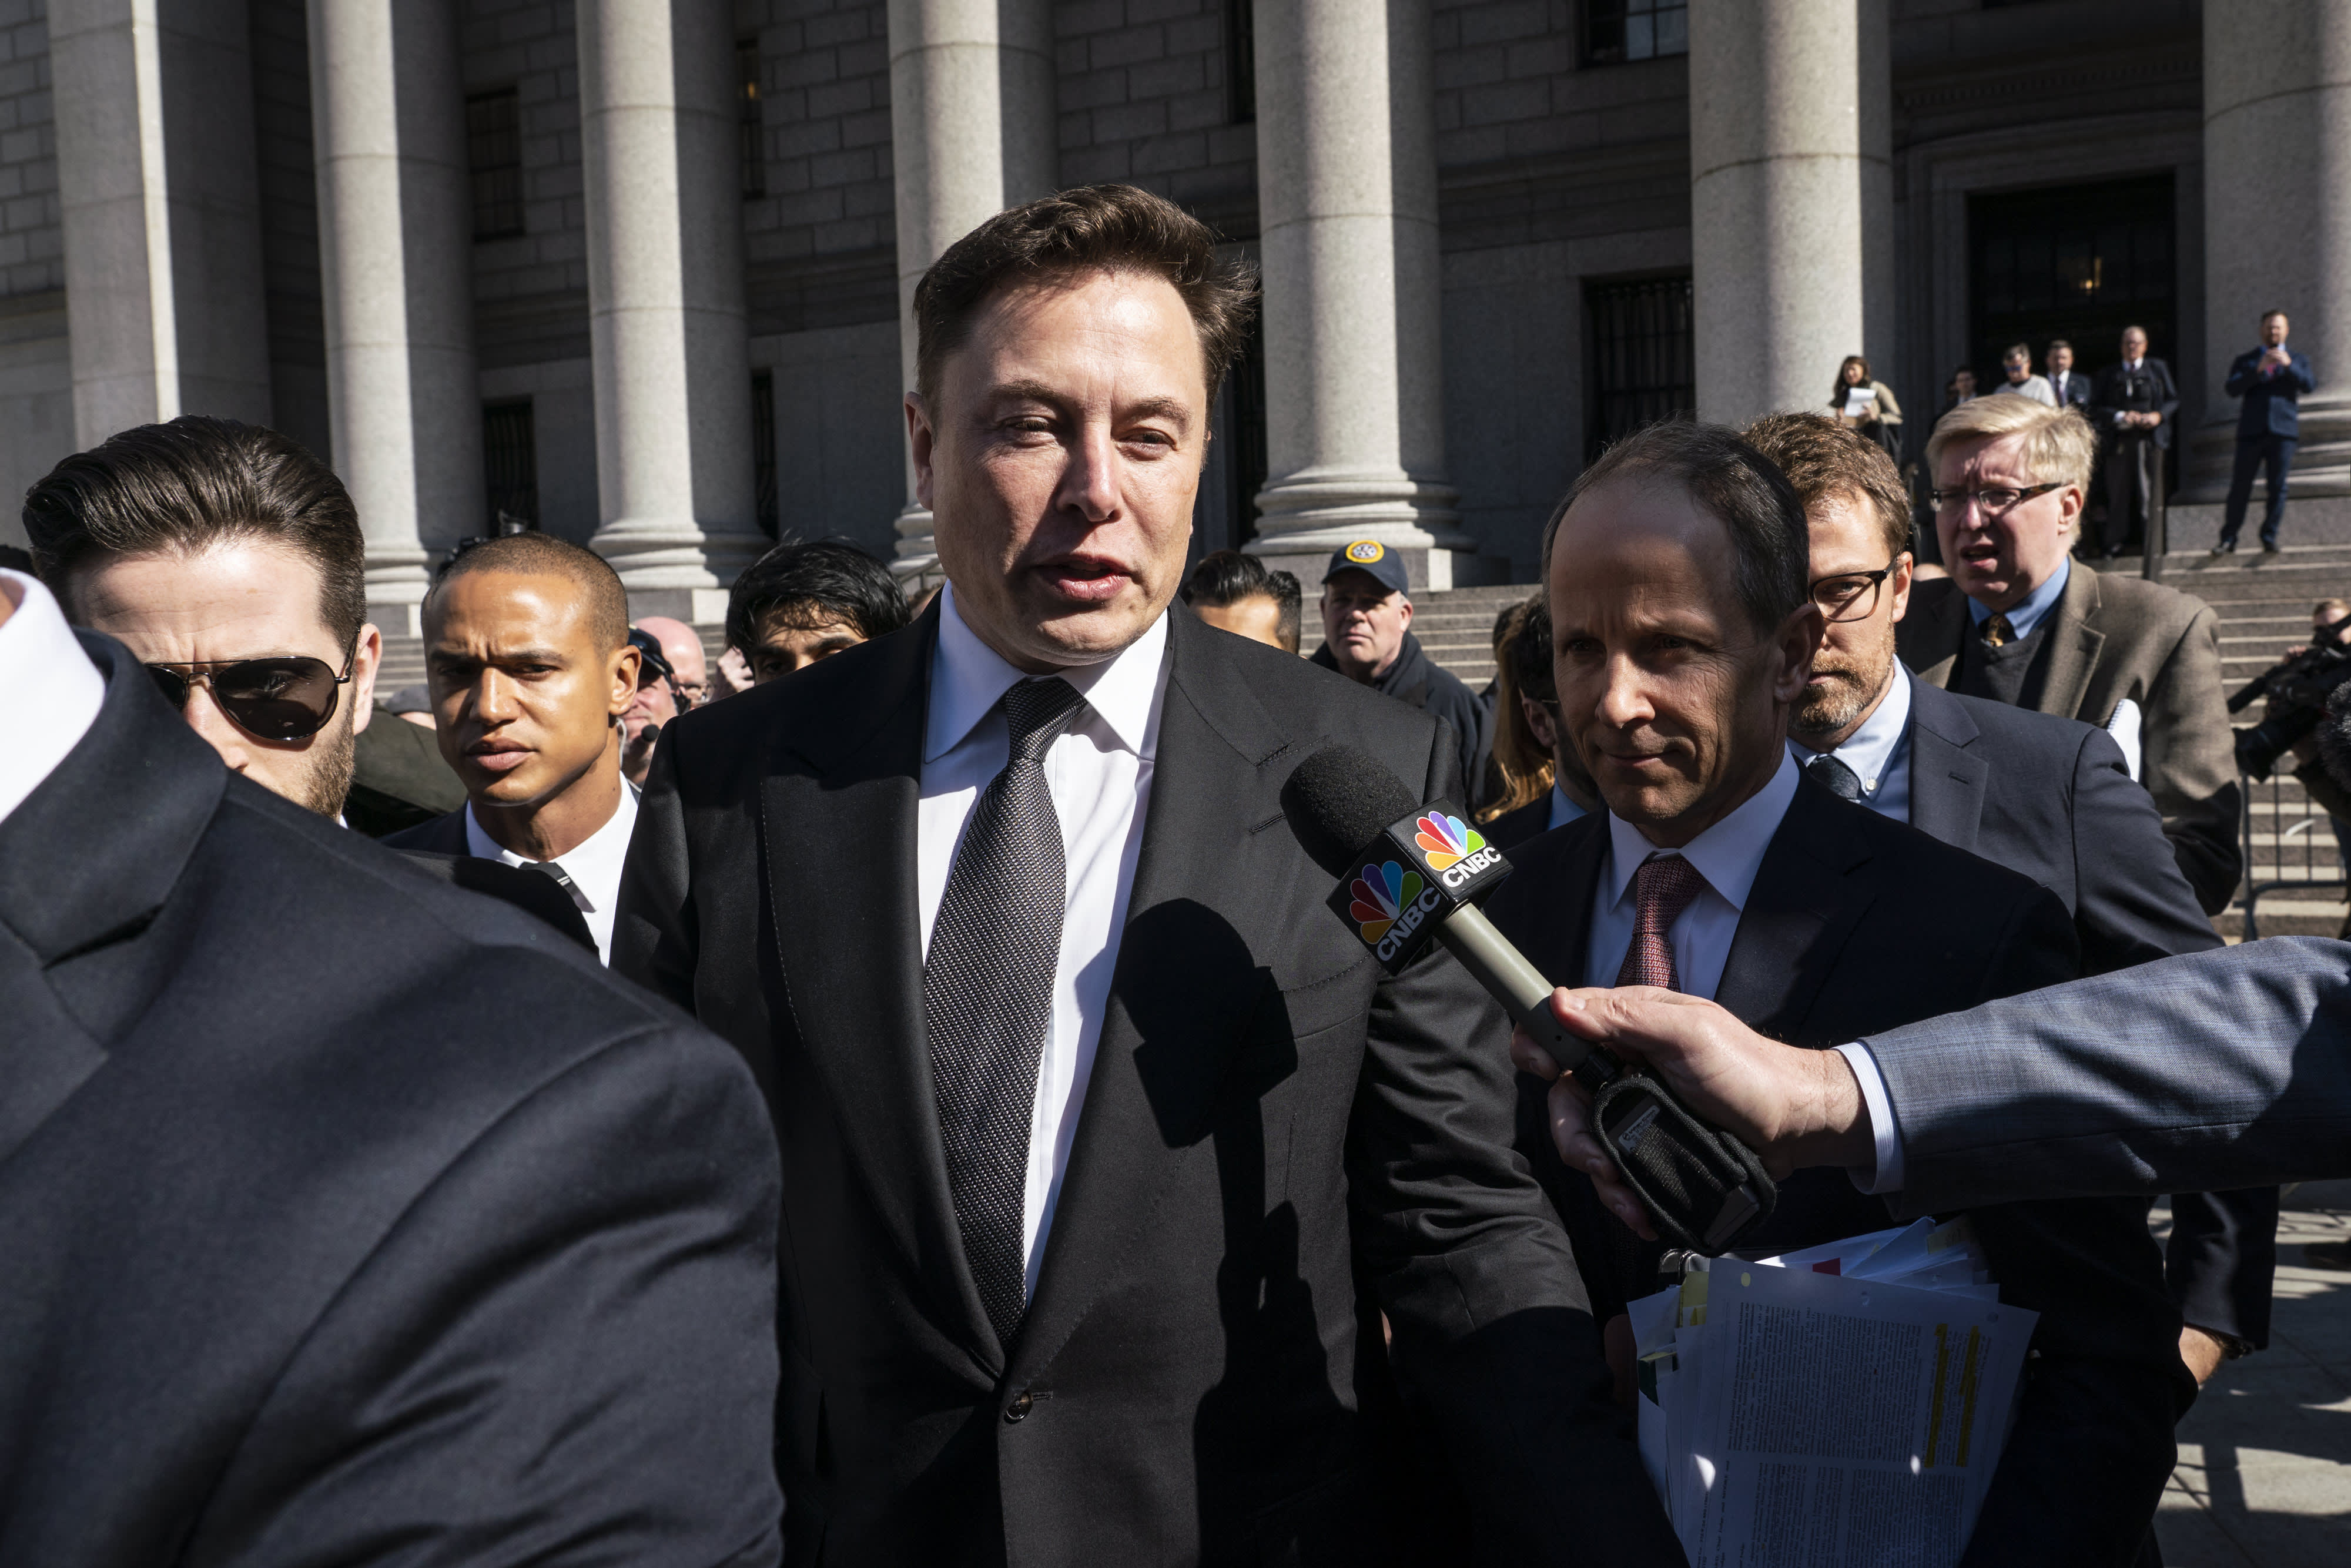 Elon Musk Says Twitter Deal ‘Temporarily on Hold